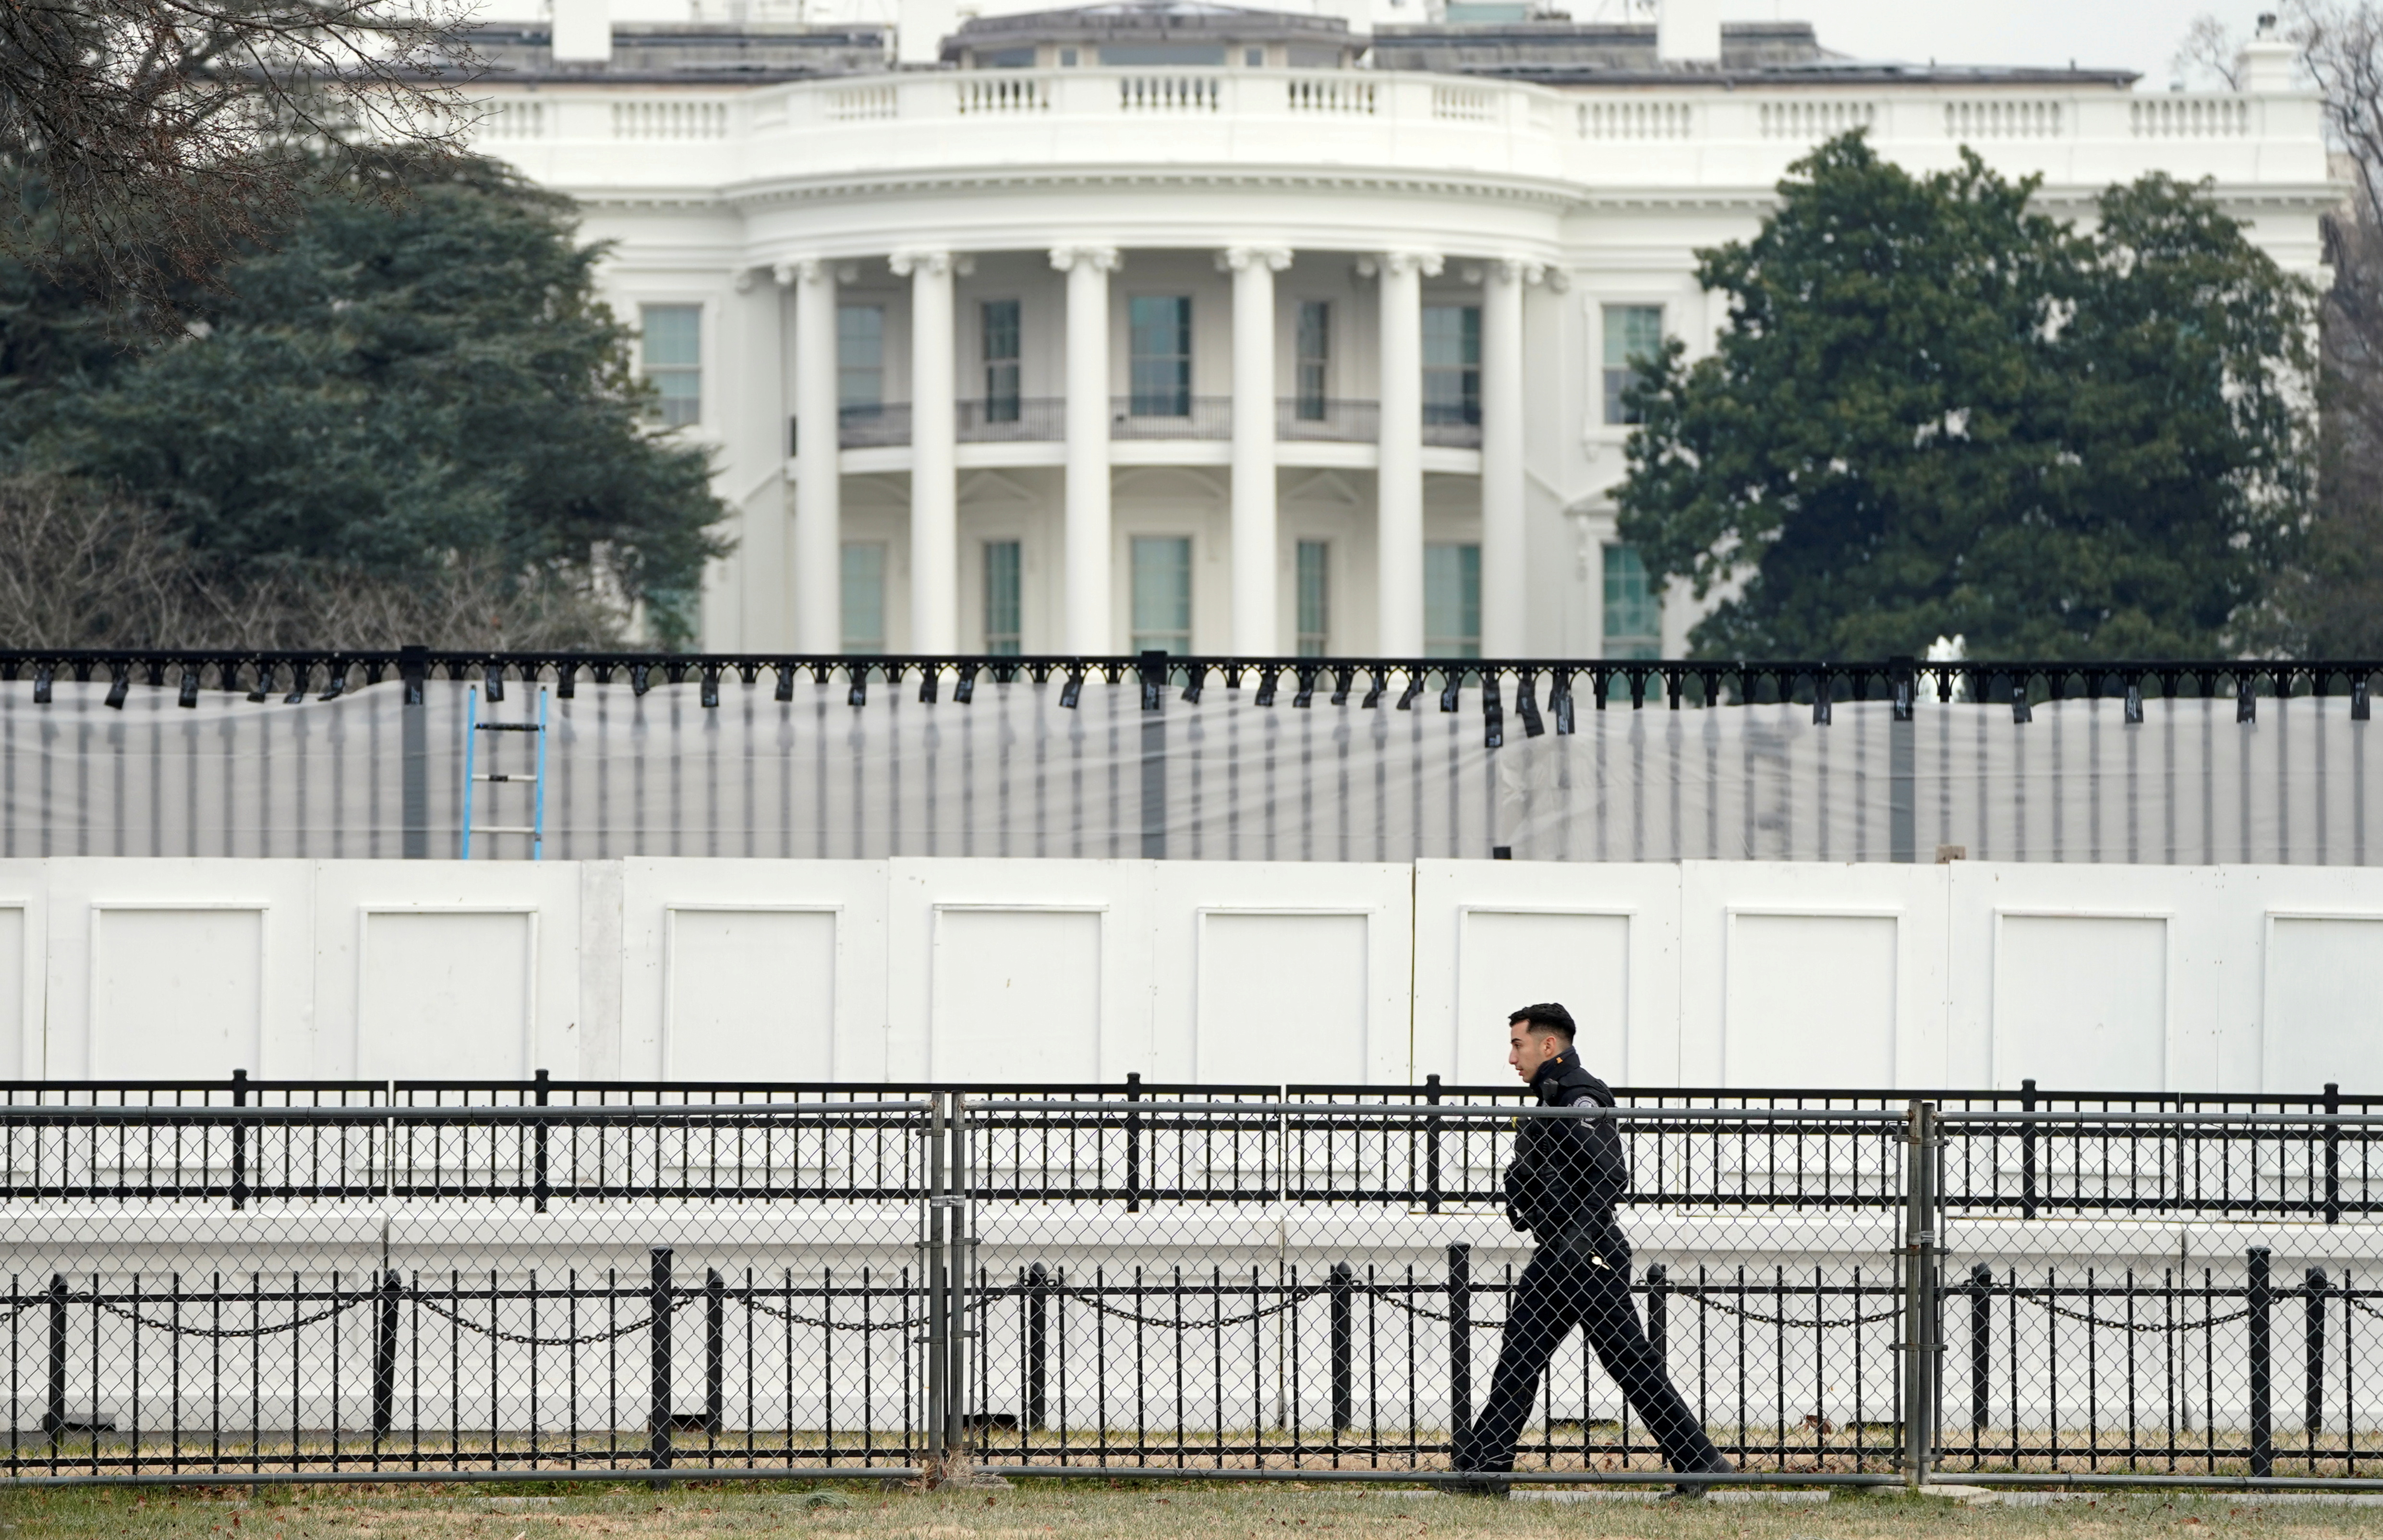 Security fencing at the White House in Washington